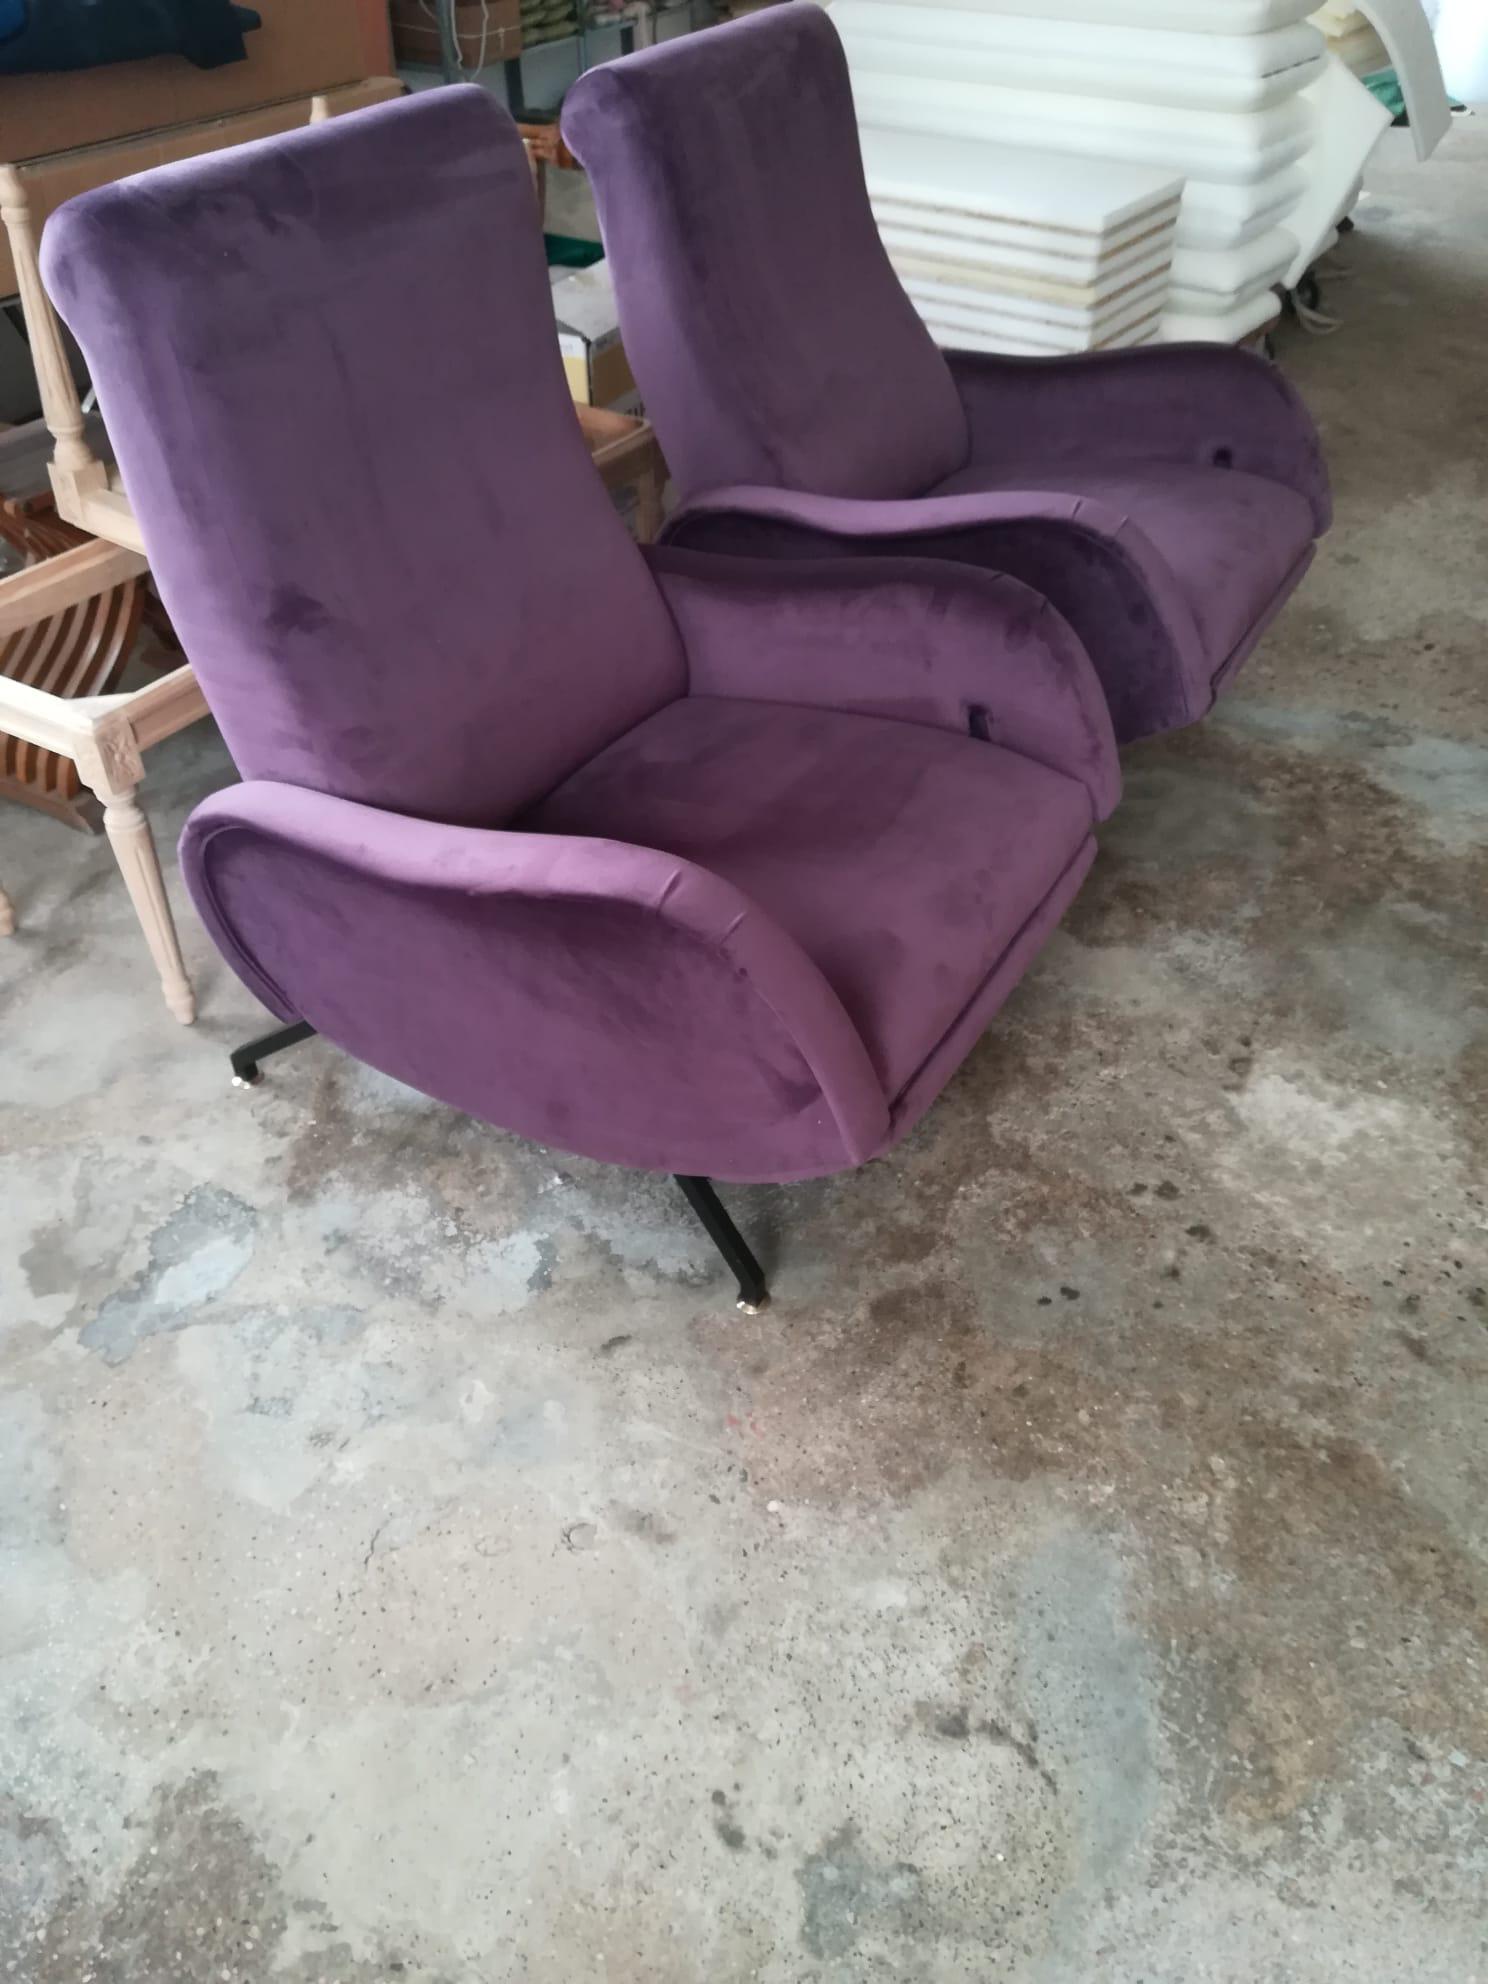 Two Reclining Armchairs from Italy from 1970s Attributed to Zanuso. 
Reupholstered in Purple Velvet , they have been attributed to Zanuso for lines, shapes and proportions.
The reclining system allows two seating positions. When on the reclined